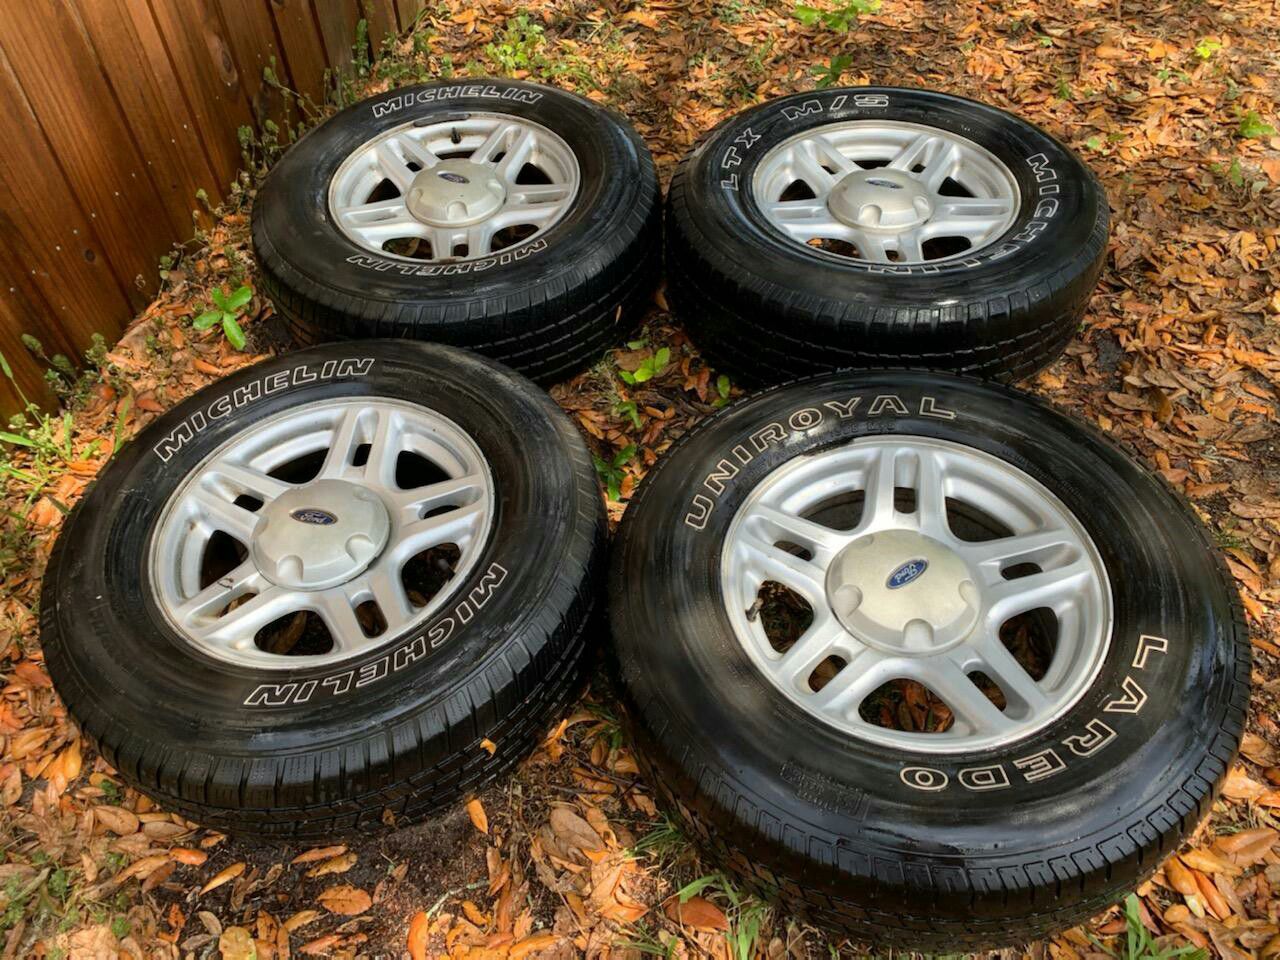 2005 Ford Explorer tires and wheels